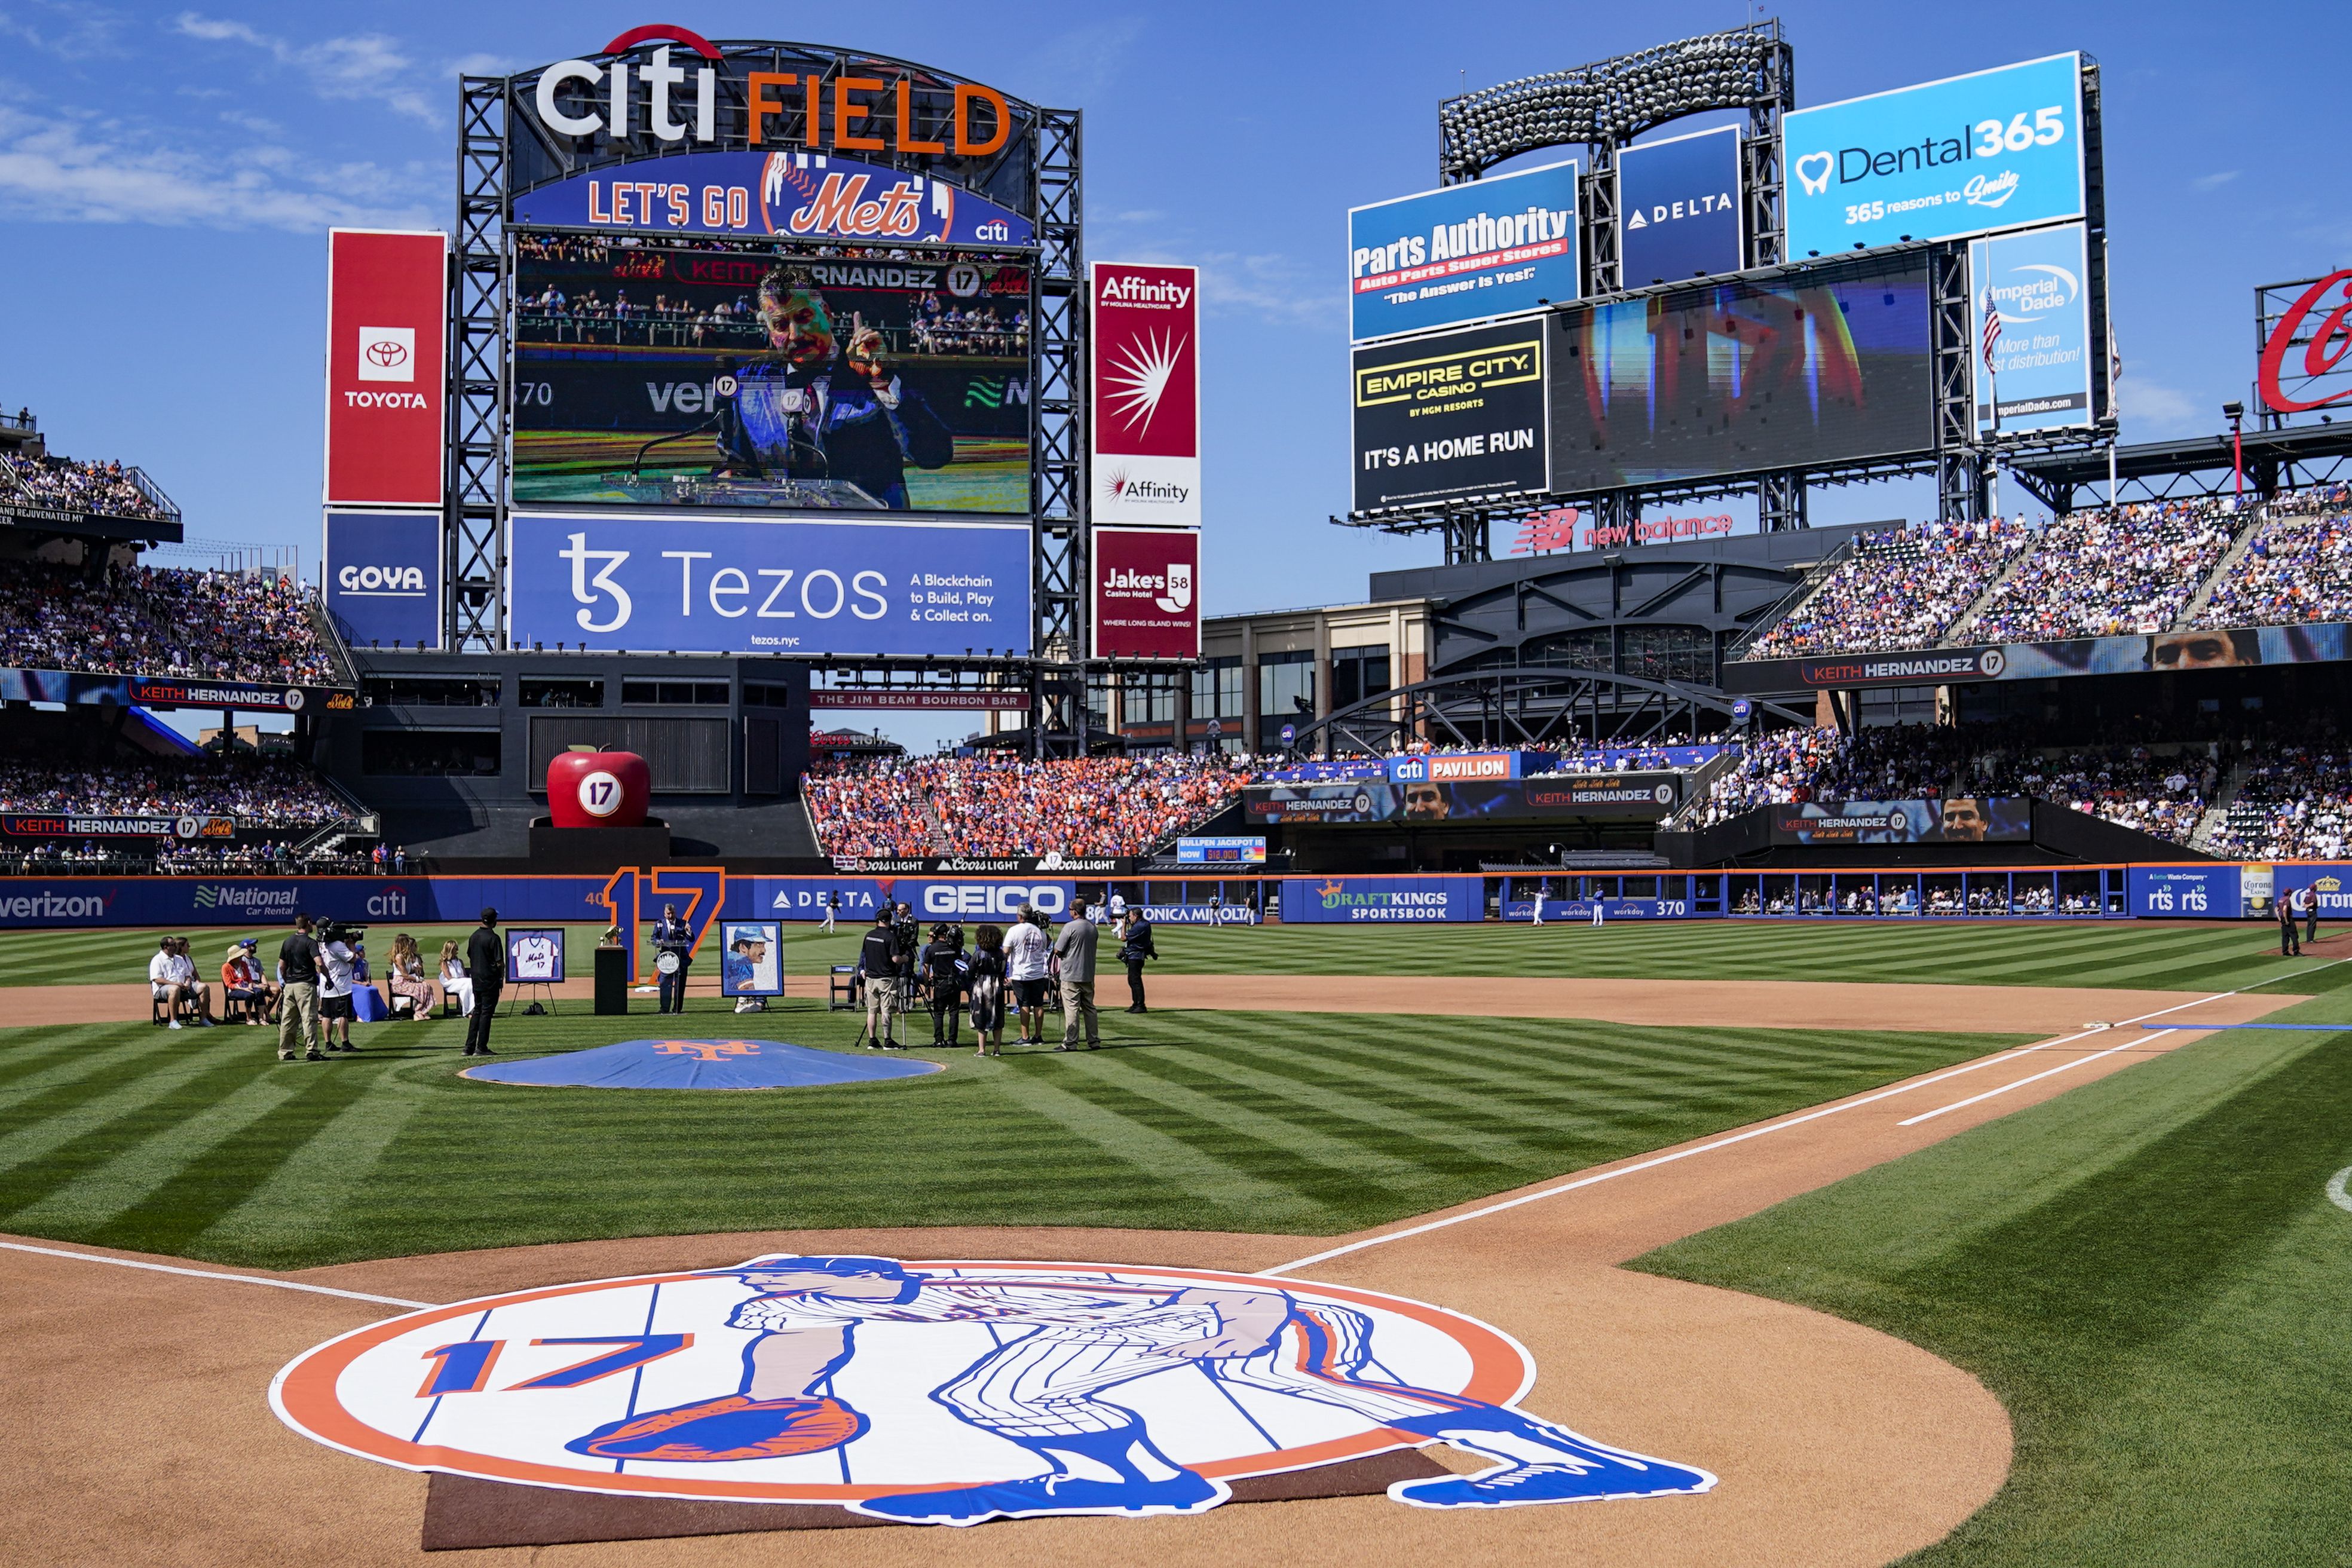 2022 Mets home opener at Citi Field